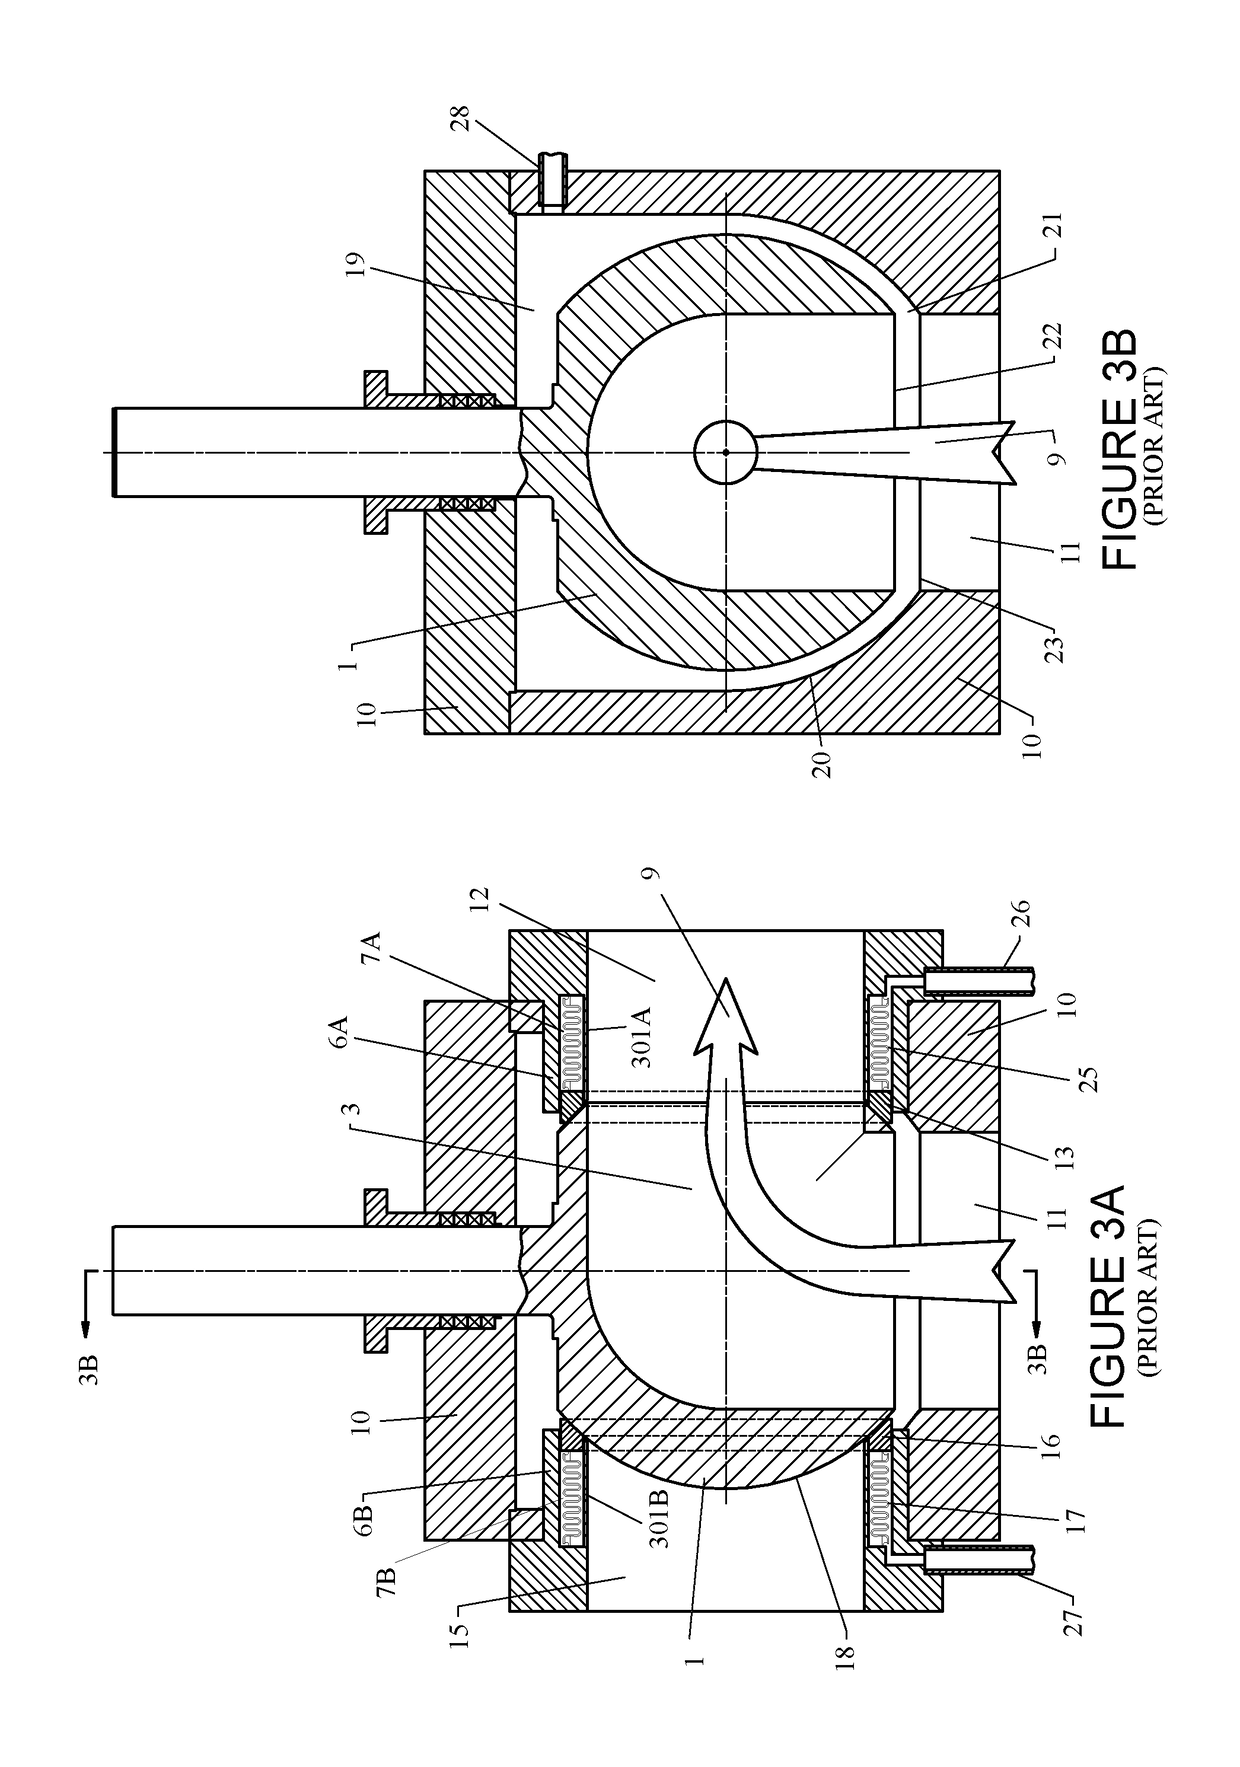 Multi-port ball valve with induced flow in ball-body cavity